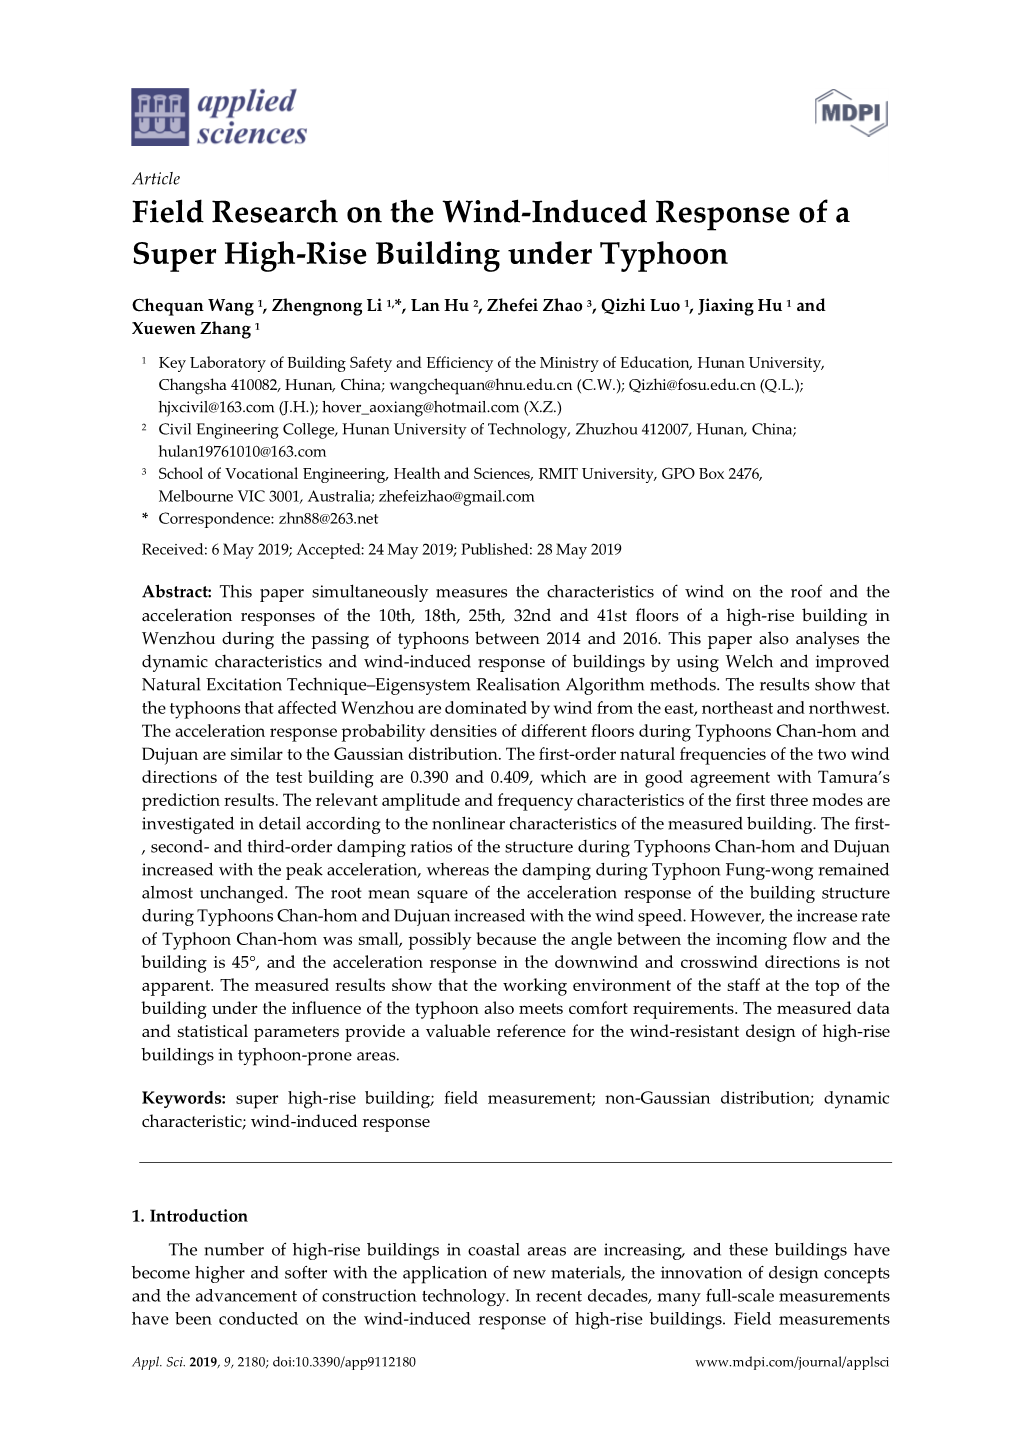 Field Research on the Wind-Induced Response of a Super High-Rise Building Under Typhoon